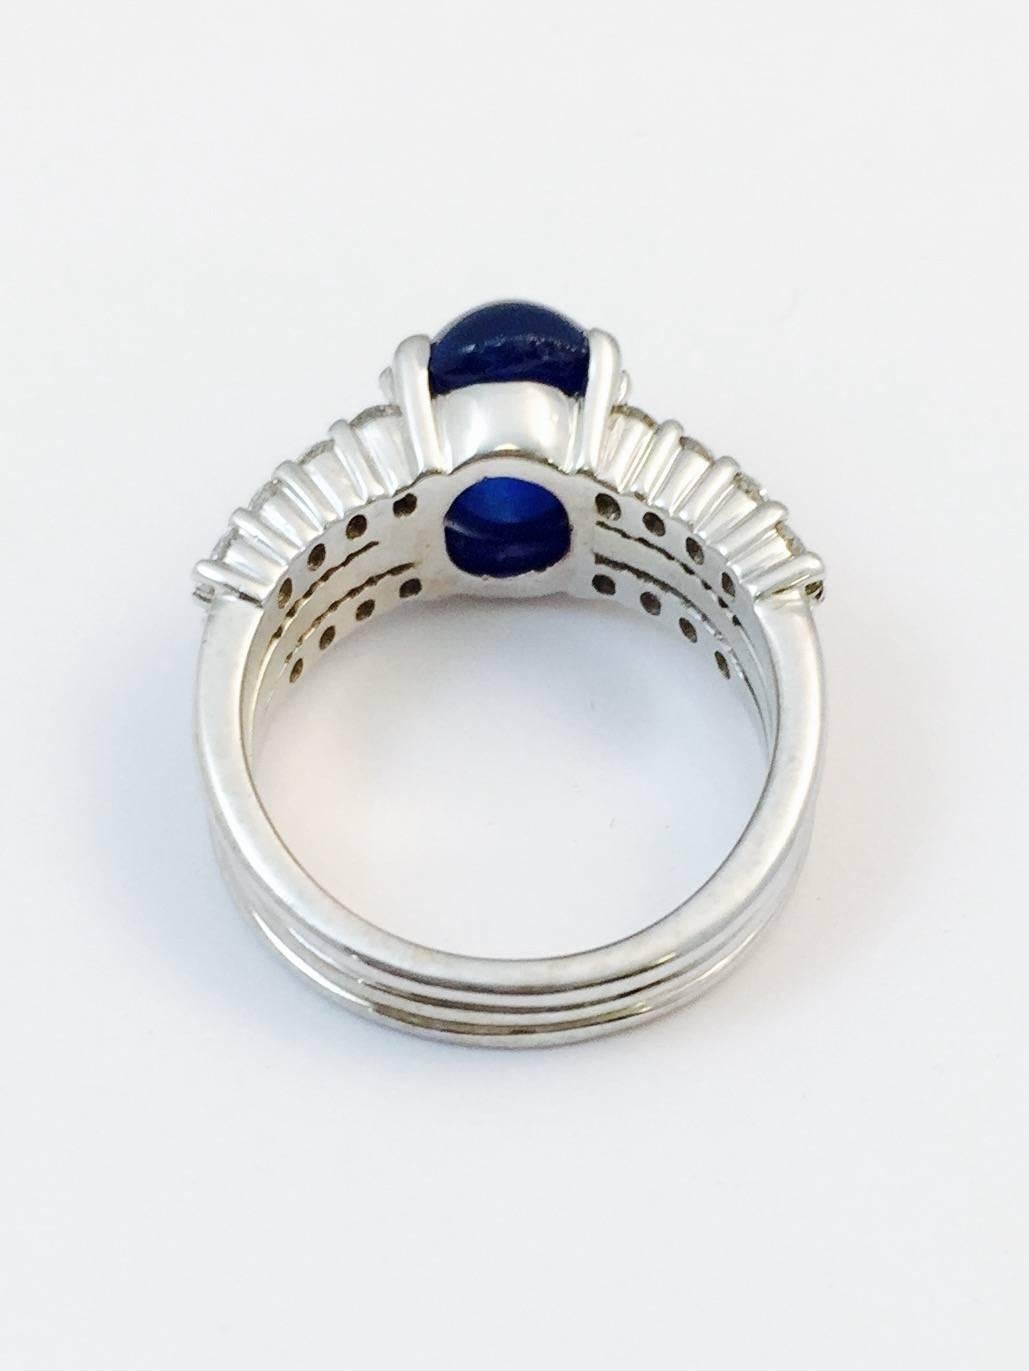 Cabochon Sapphire Diamond Gold Ring In Excellent Condition For Sale In Palm Beach, FL